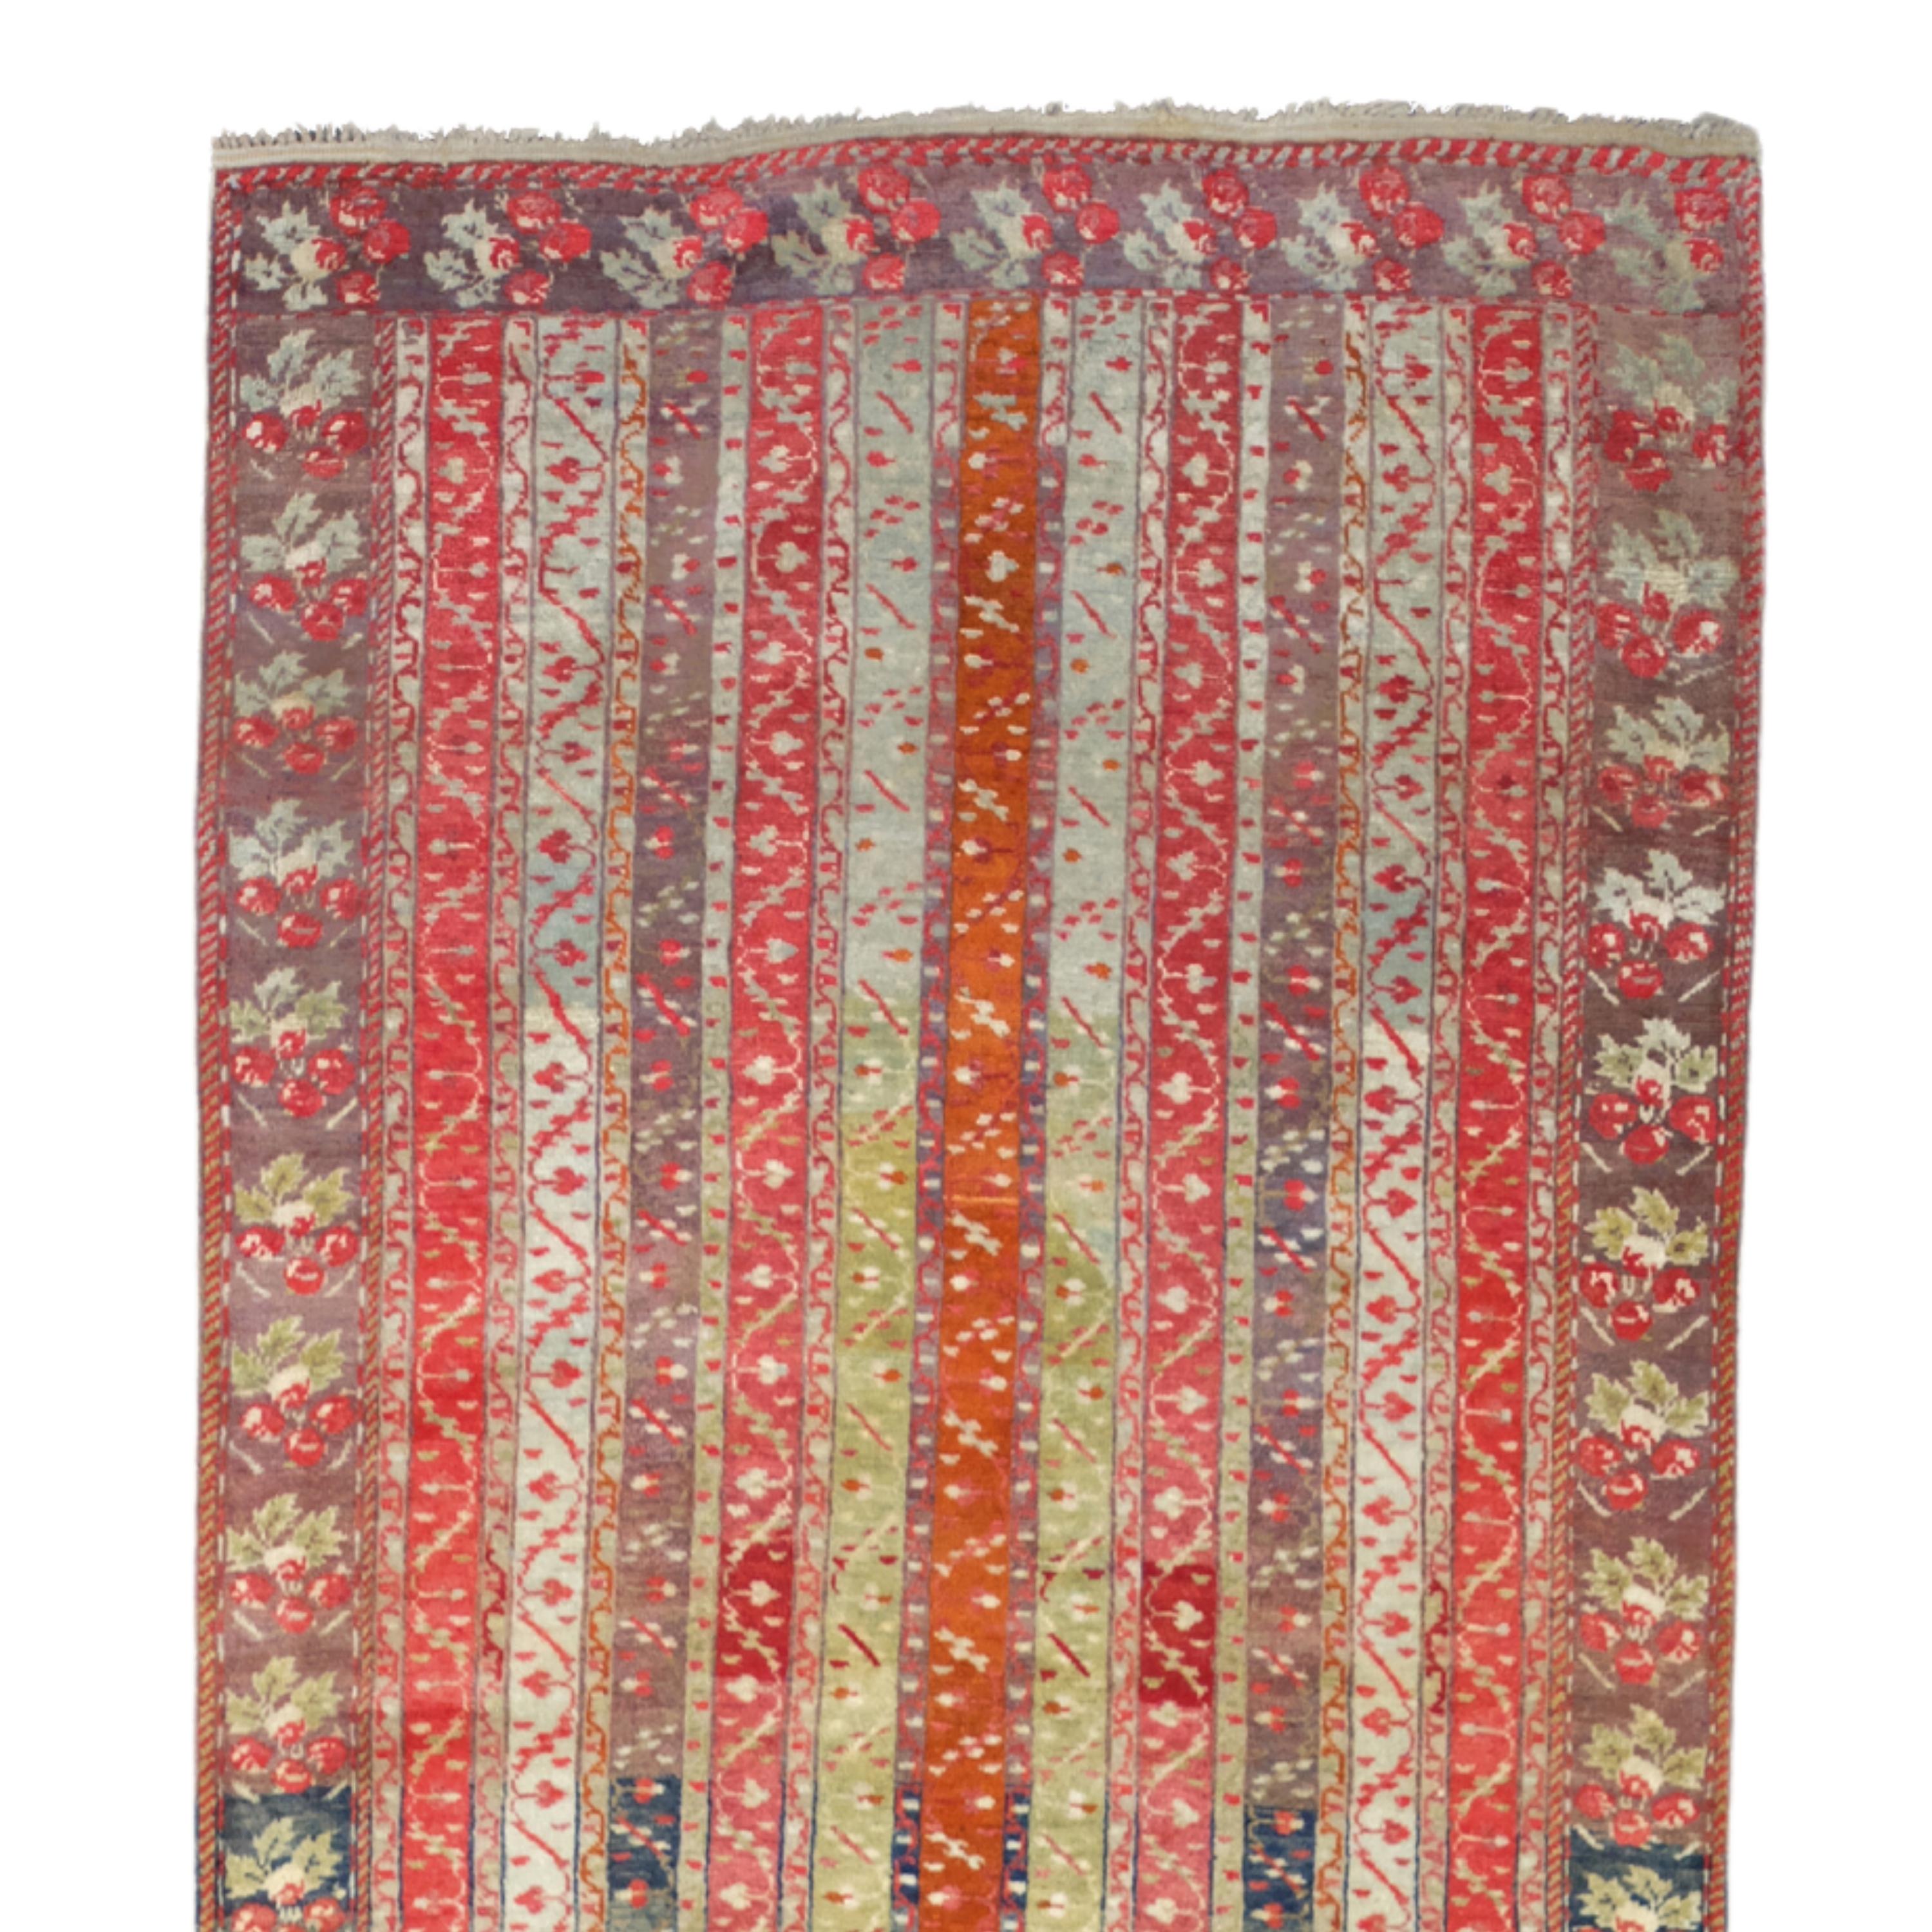 Antique Sivas Runner
19th Century Anatolian Sivas Runner
In excellent condition with high pile. Great coloration and wonderful design.
Size: 80x355cm